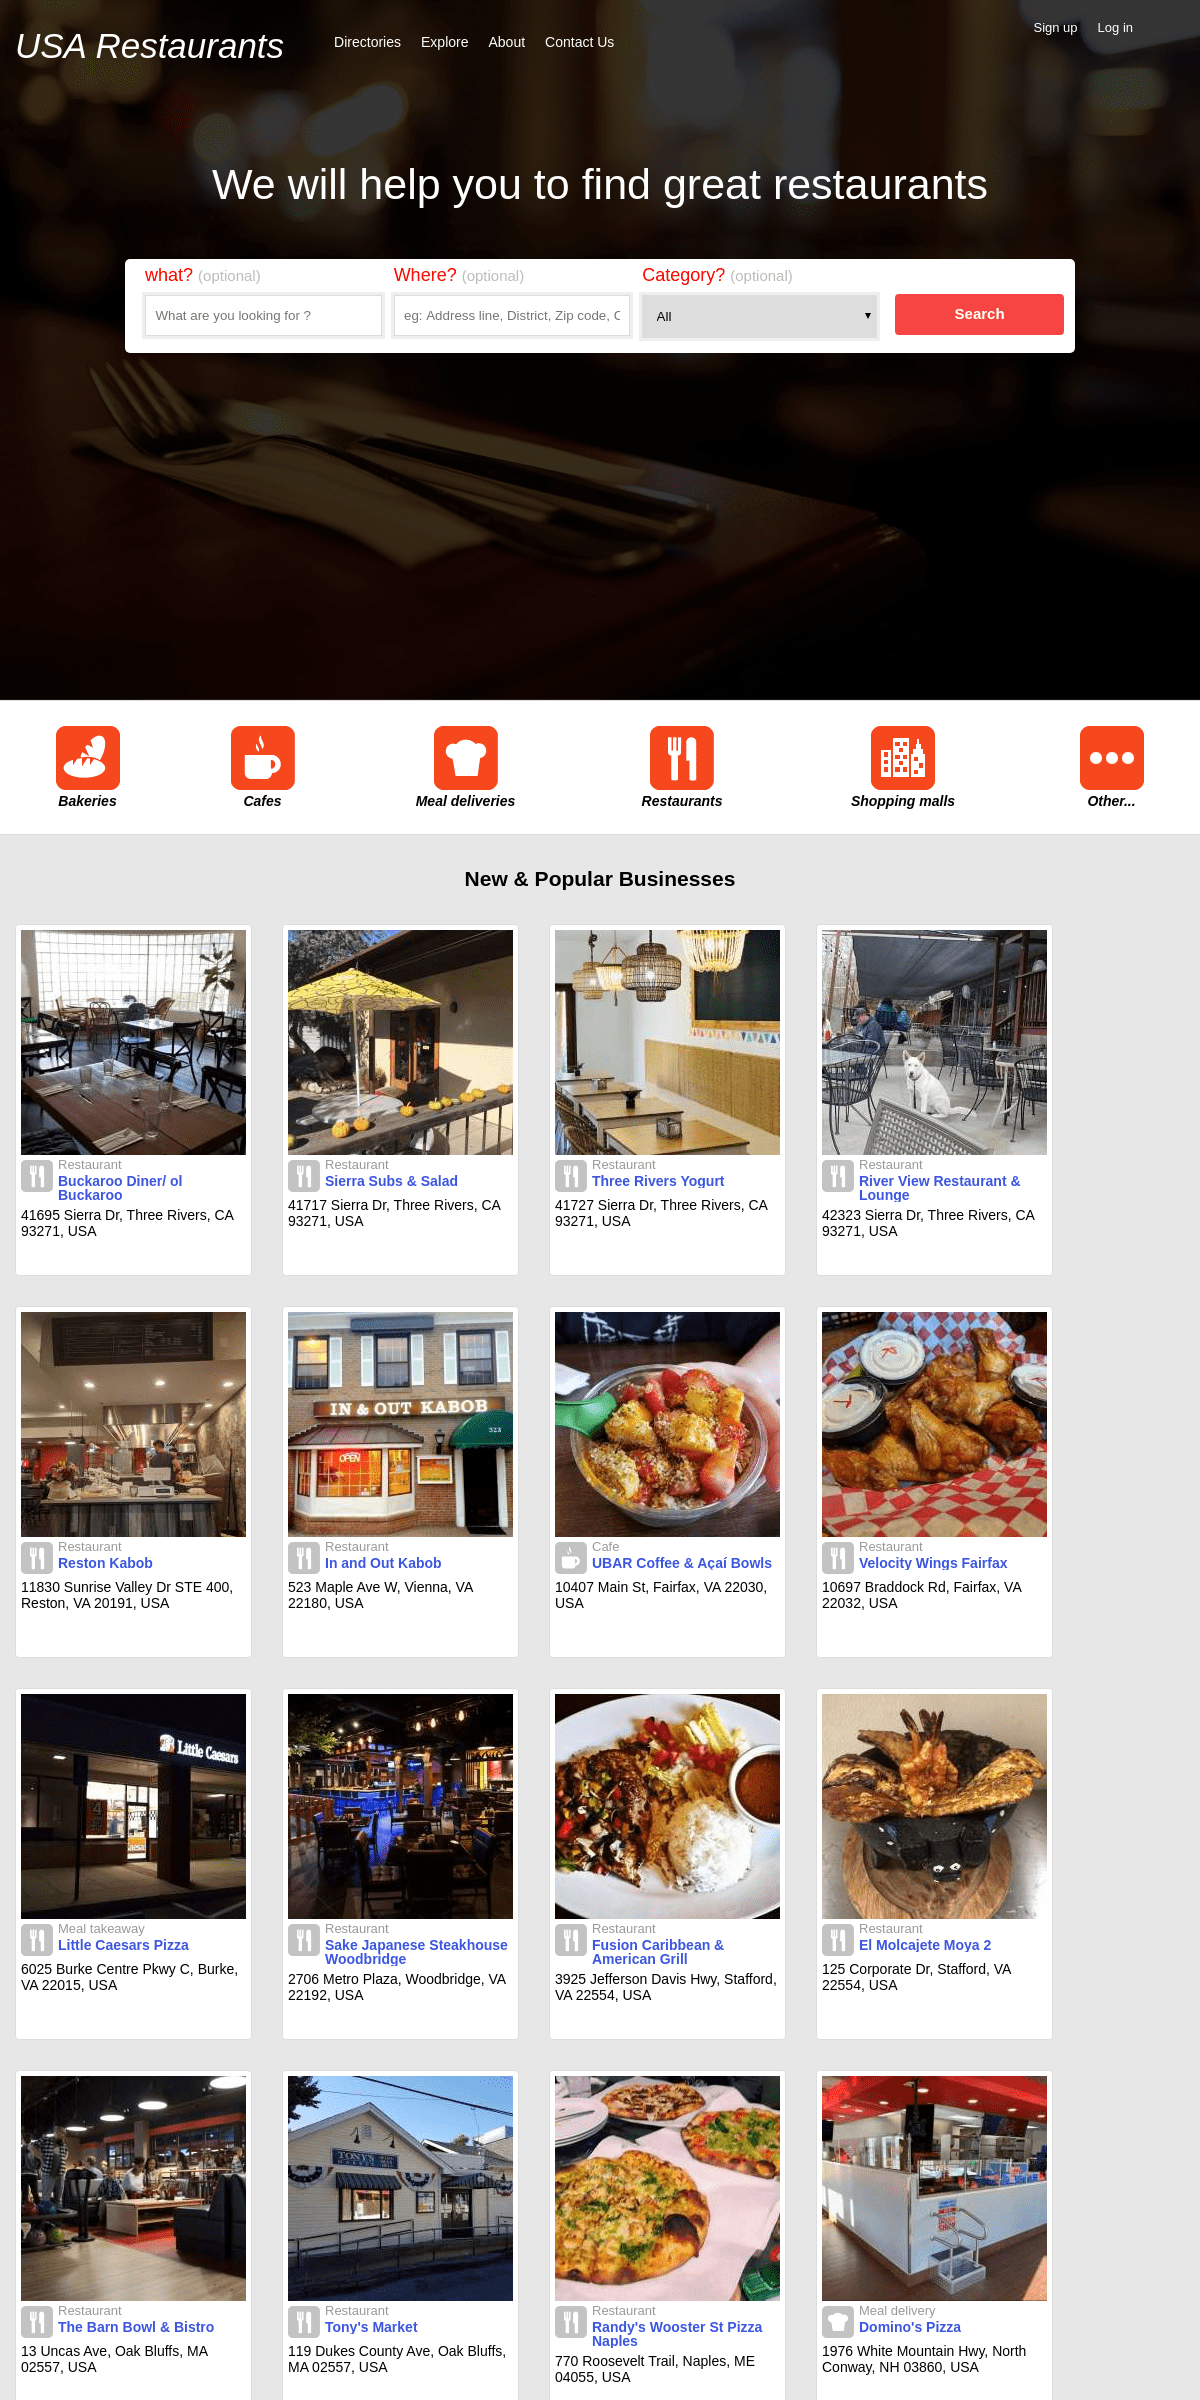 A complete backup of usarestaurants.info